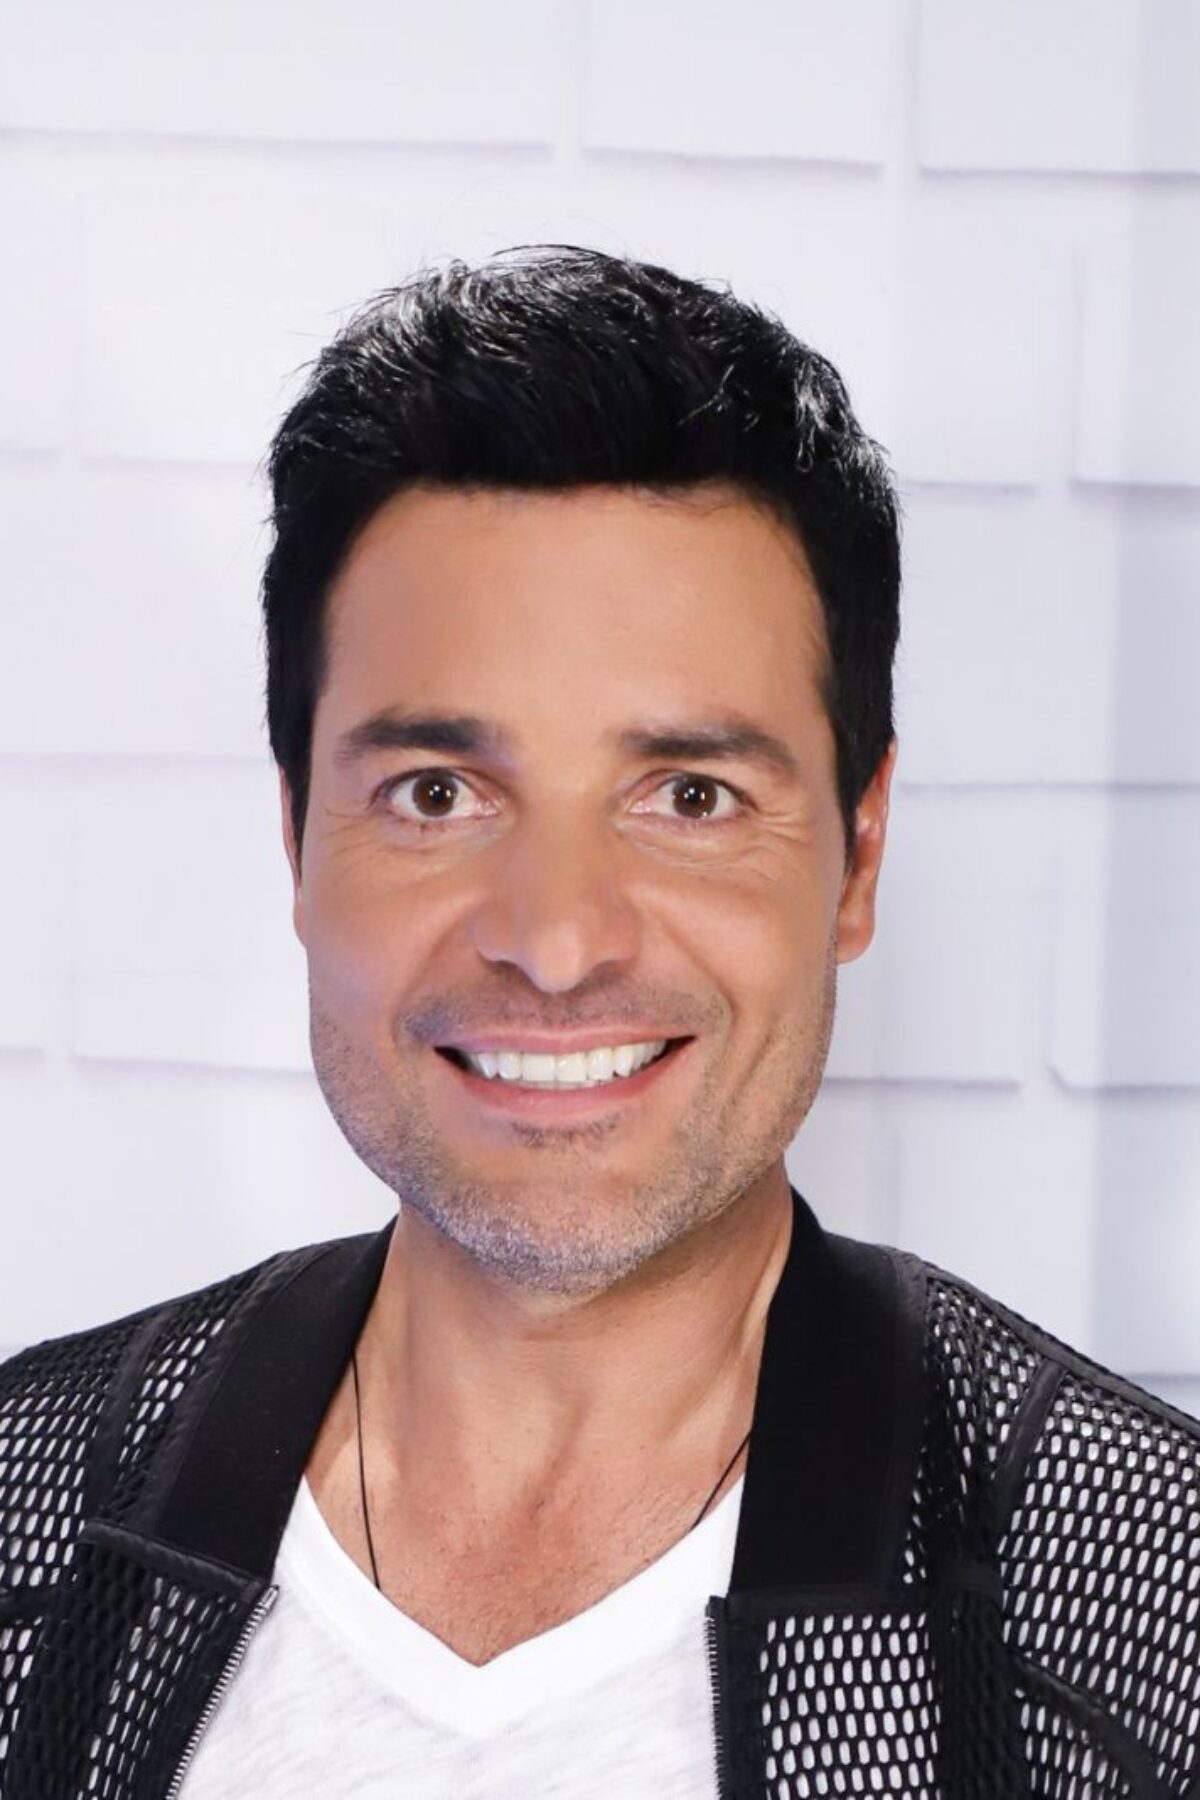 DORAL, FL - MAY 03: Chayanne attends the Di Que Sientes Tu new video preview, and Desde El ALMA Tour dates at Cobb CineBistro at CityPlace Doral on May 3, 2018 in Doral, Florida. (Photo by John Parra/Getty Images)